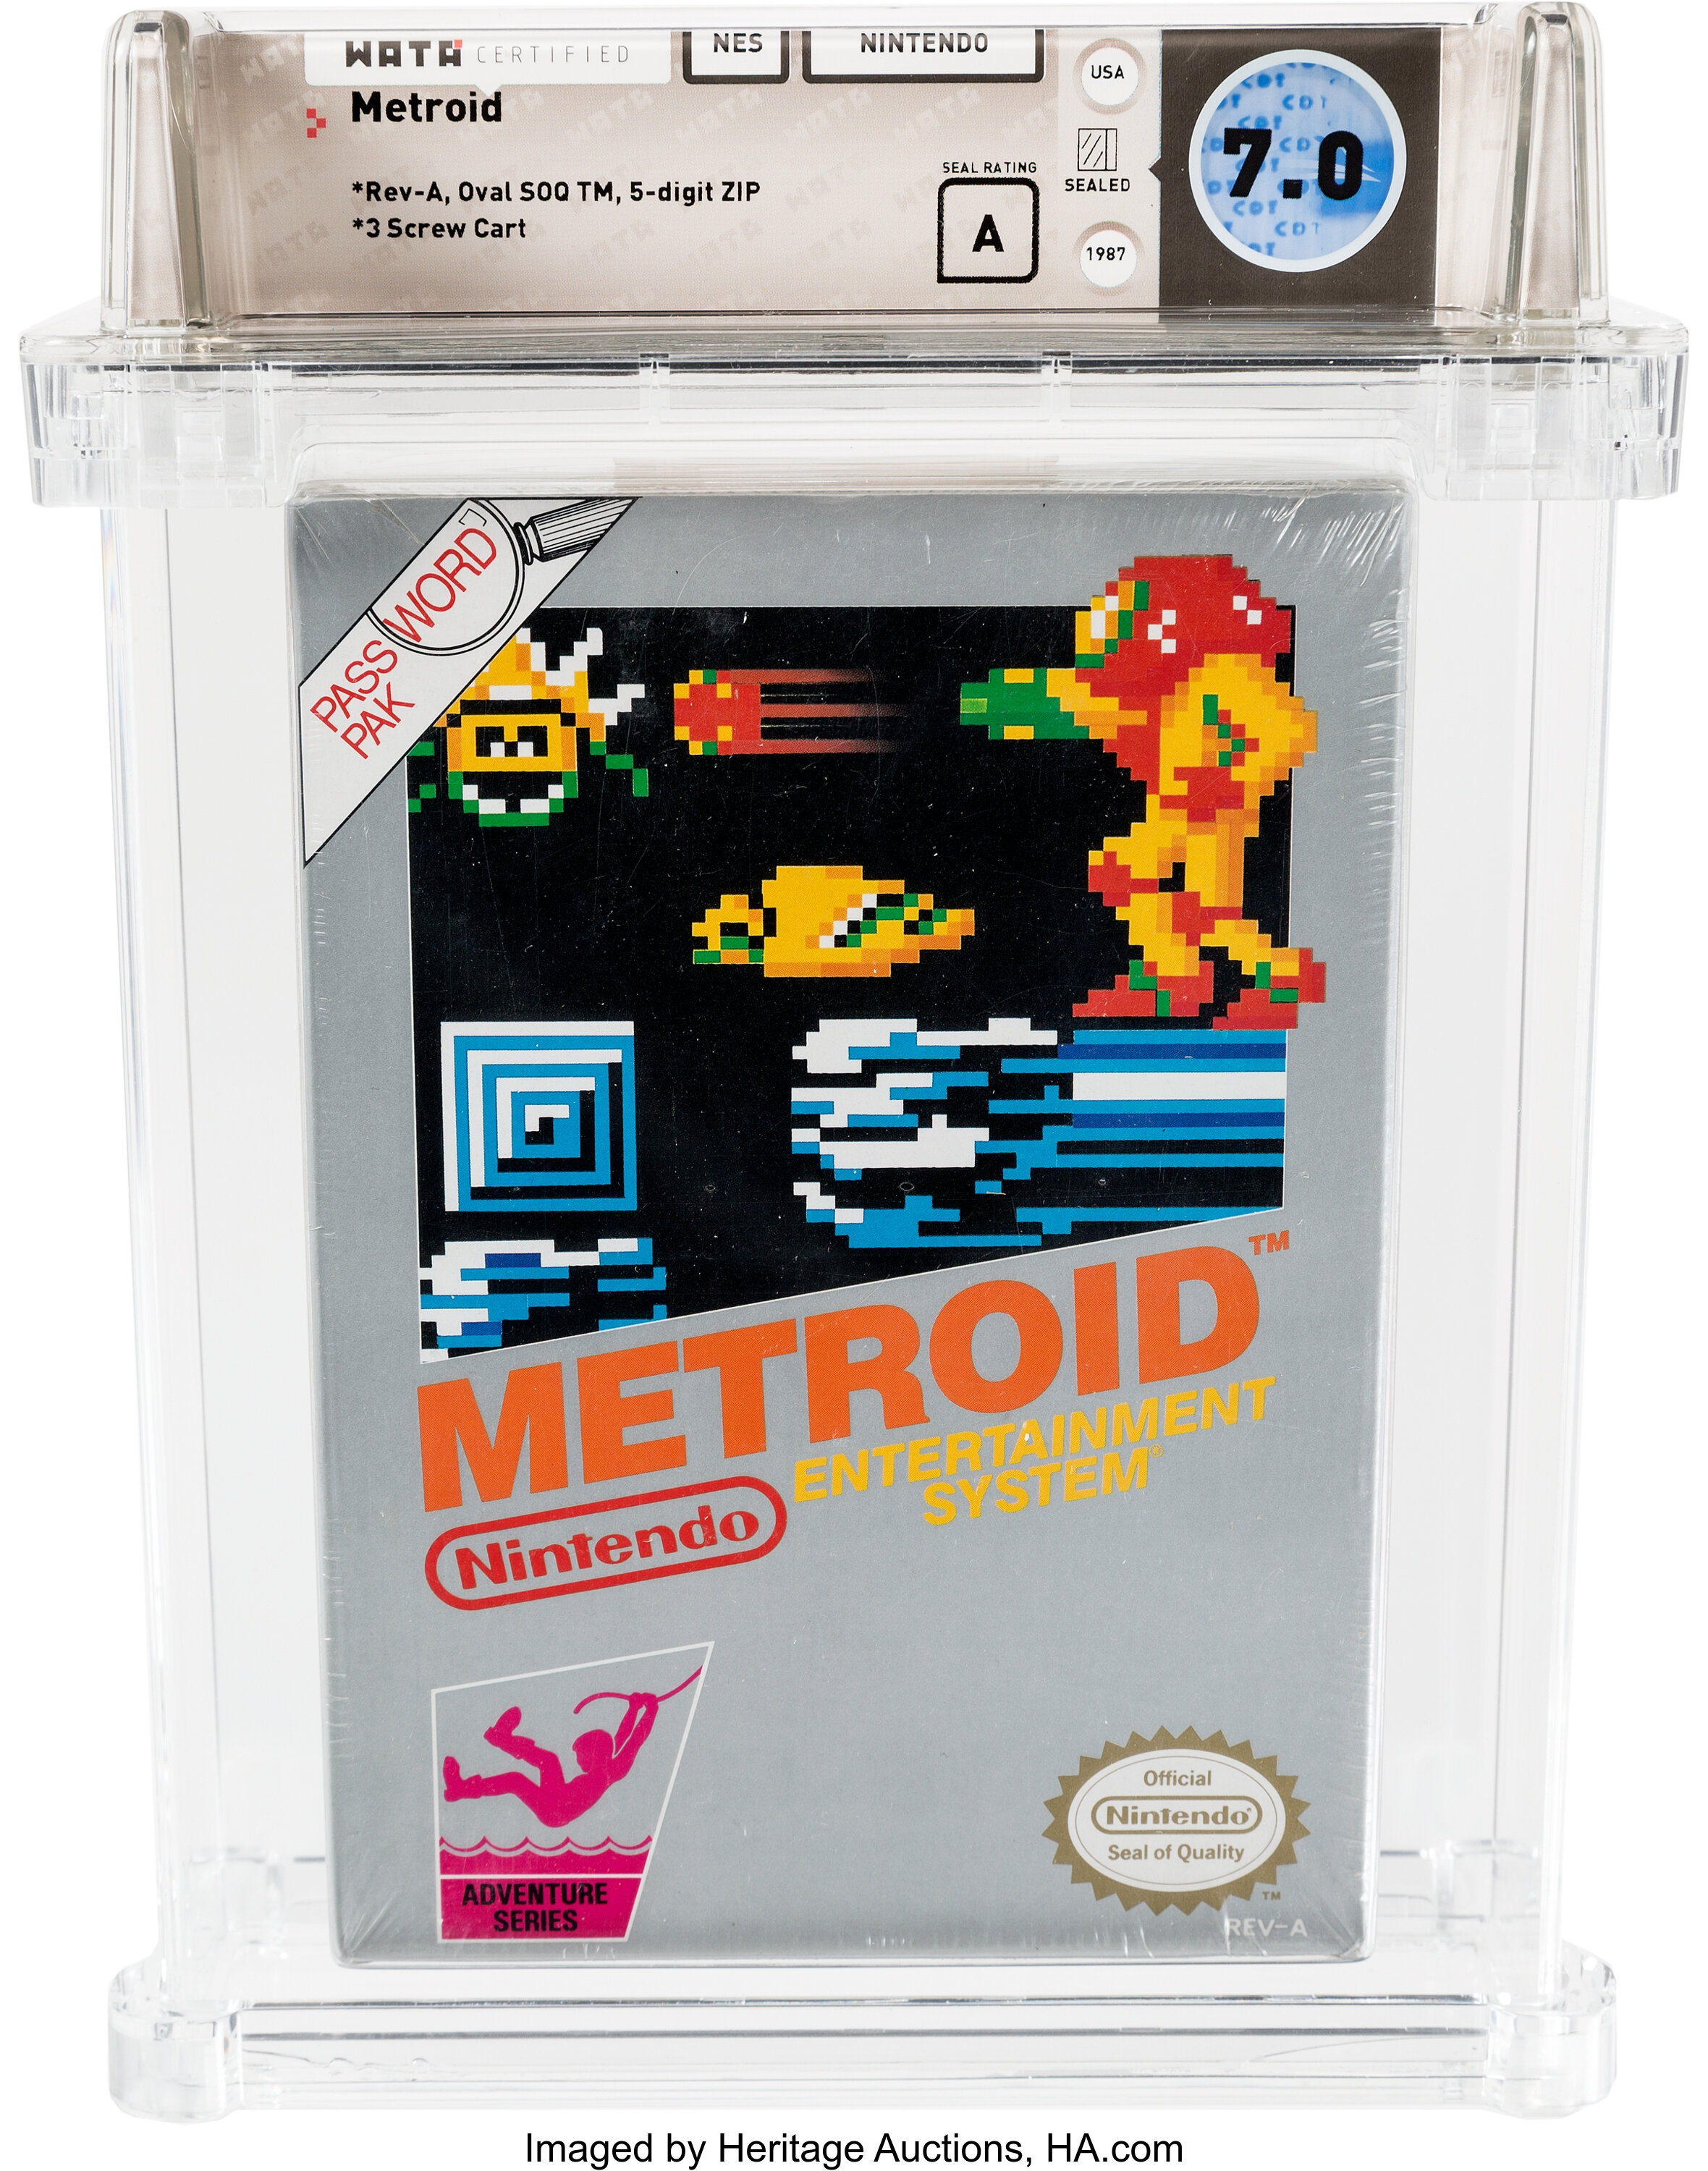 Metroid Nes Nintendo 1987 Wata 7 0 A Seal Rating Variant Lot 95536 Heritage Auctions